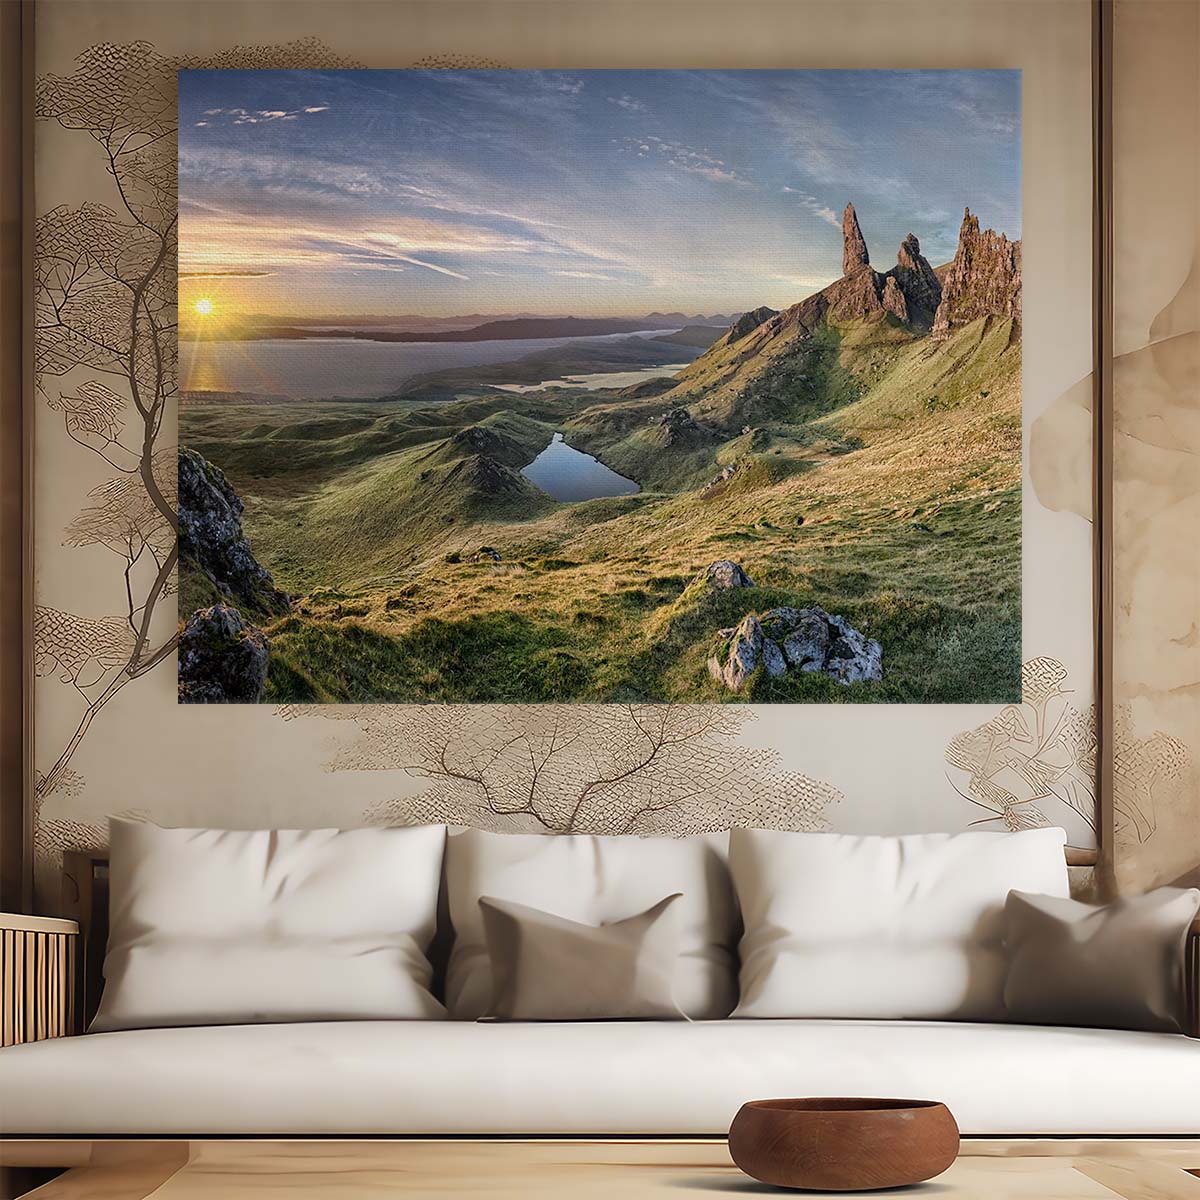 Sunrise at Old Man of Storr, Skye Wall Art by Luxuriance Designs. Made in USA.